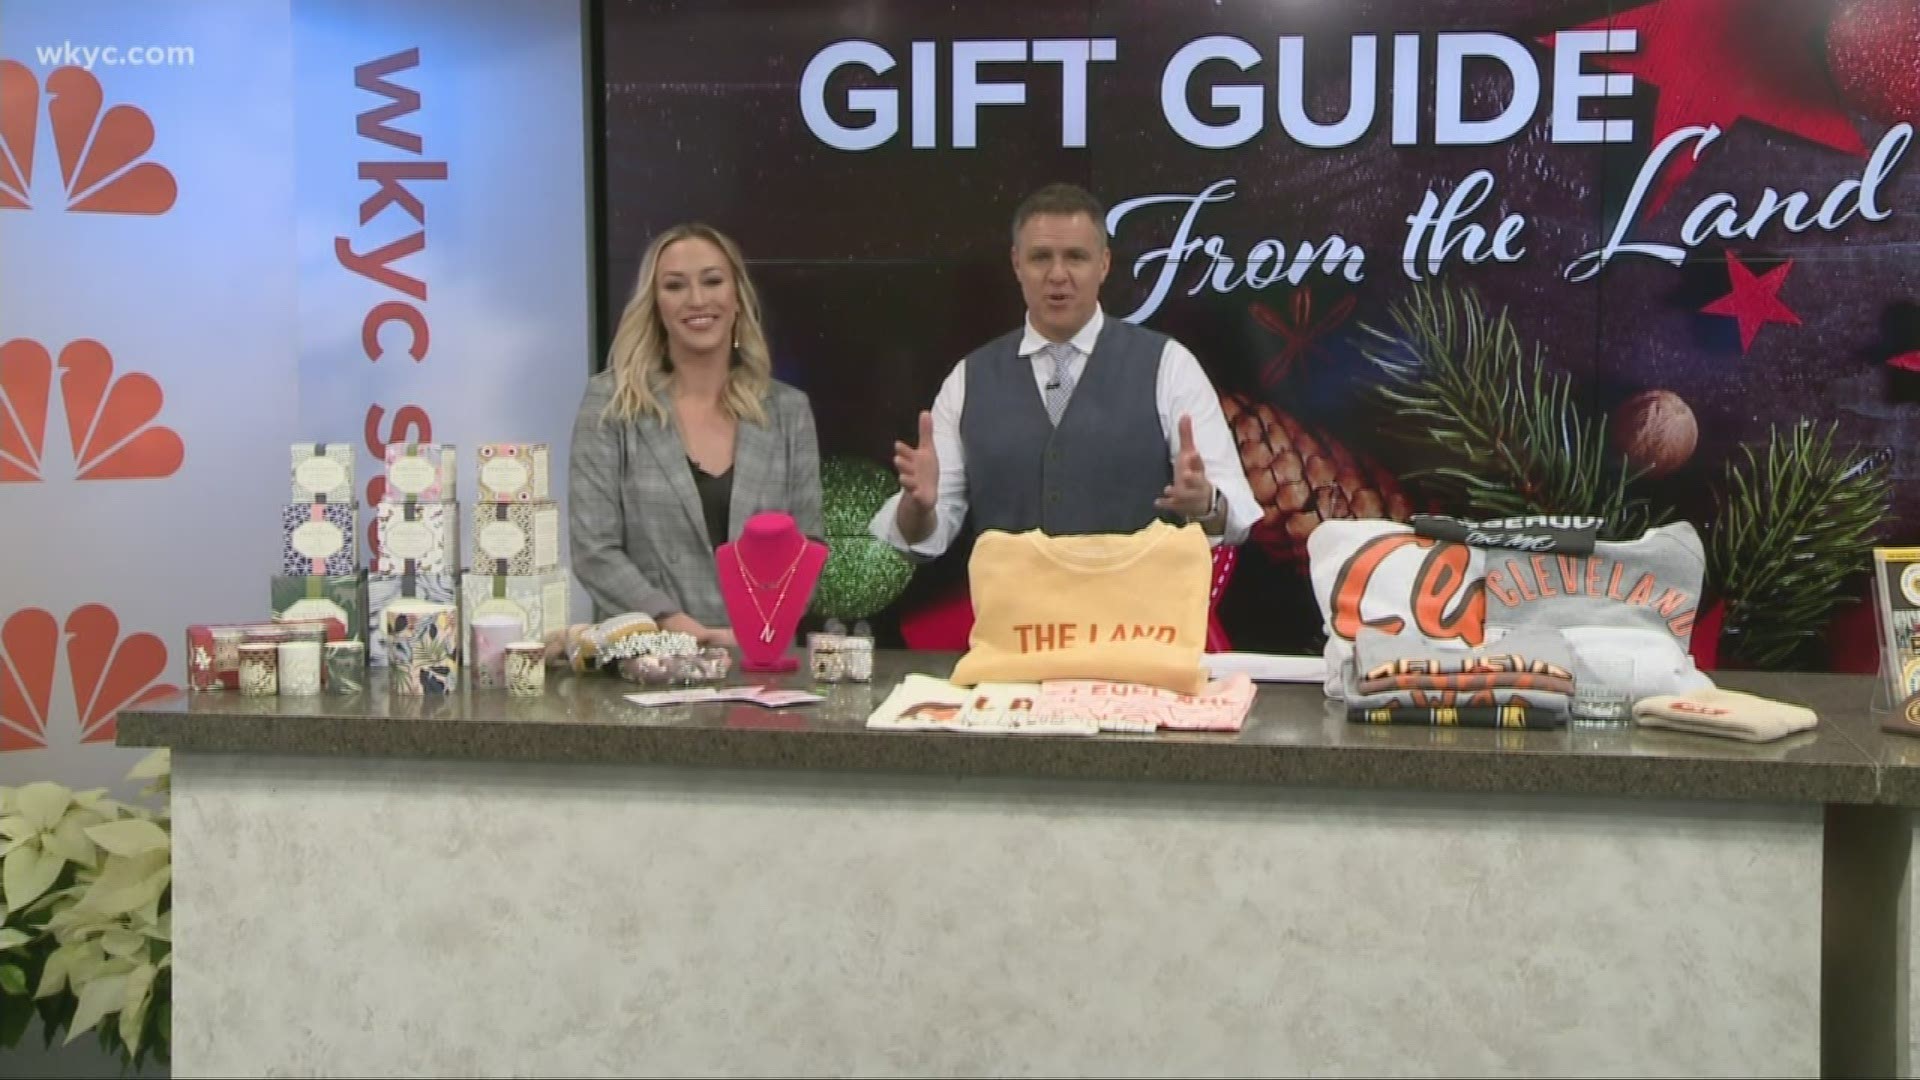 3News Special Correspondent Emily Mayfield shares options for buying locally just days before the holidays.